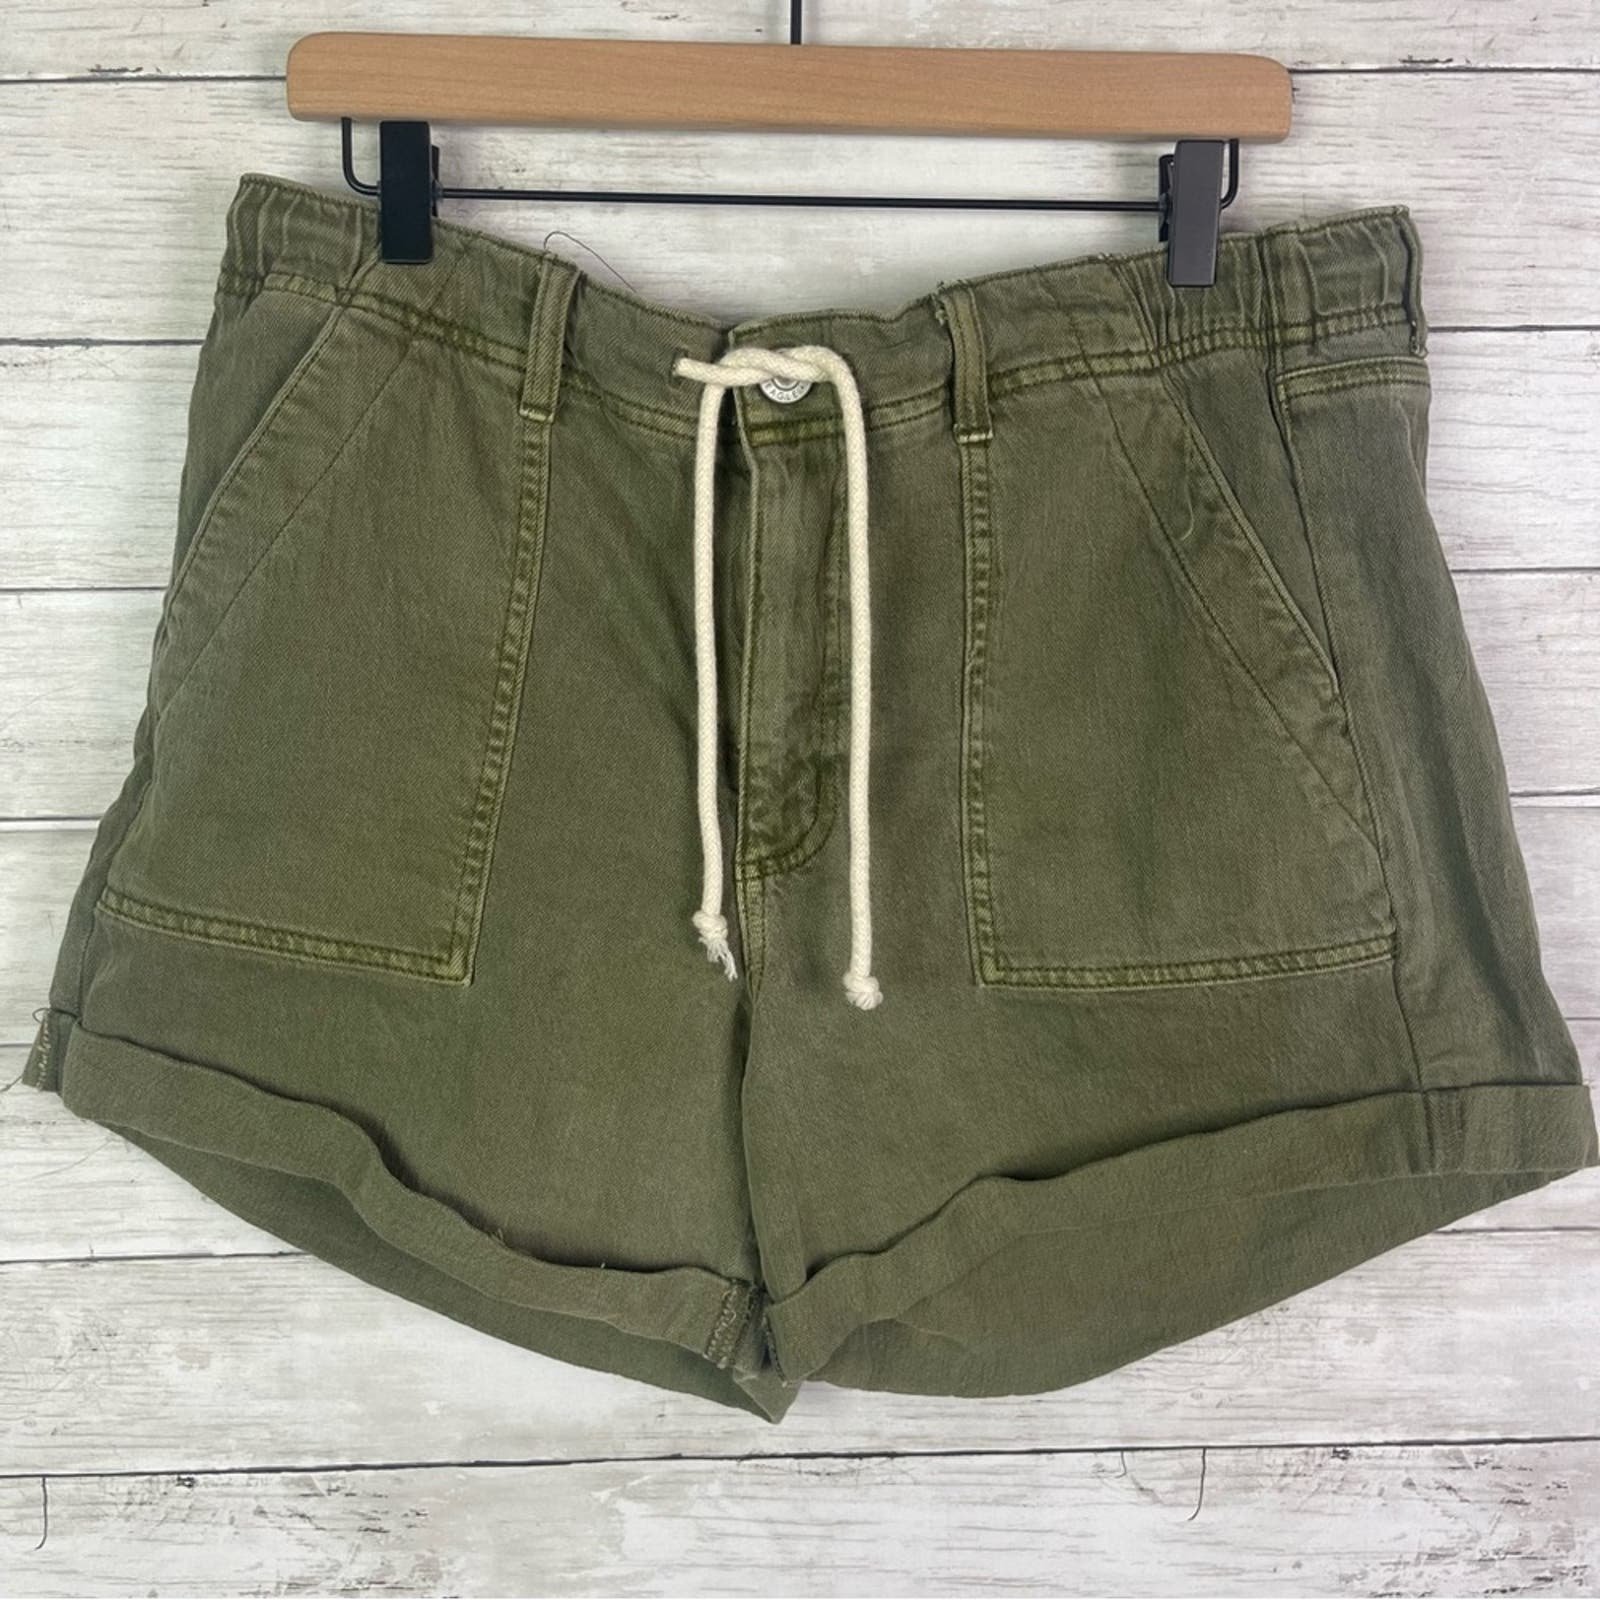 Latest  American Eagle Tomgirl Short Green FNMf4bHYN Outlet Store